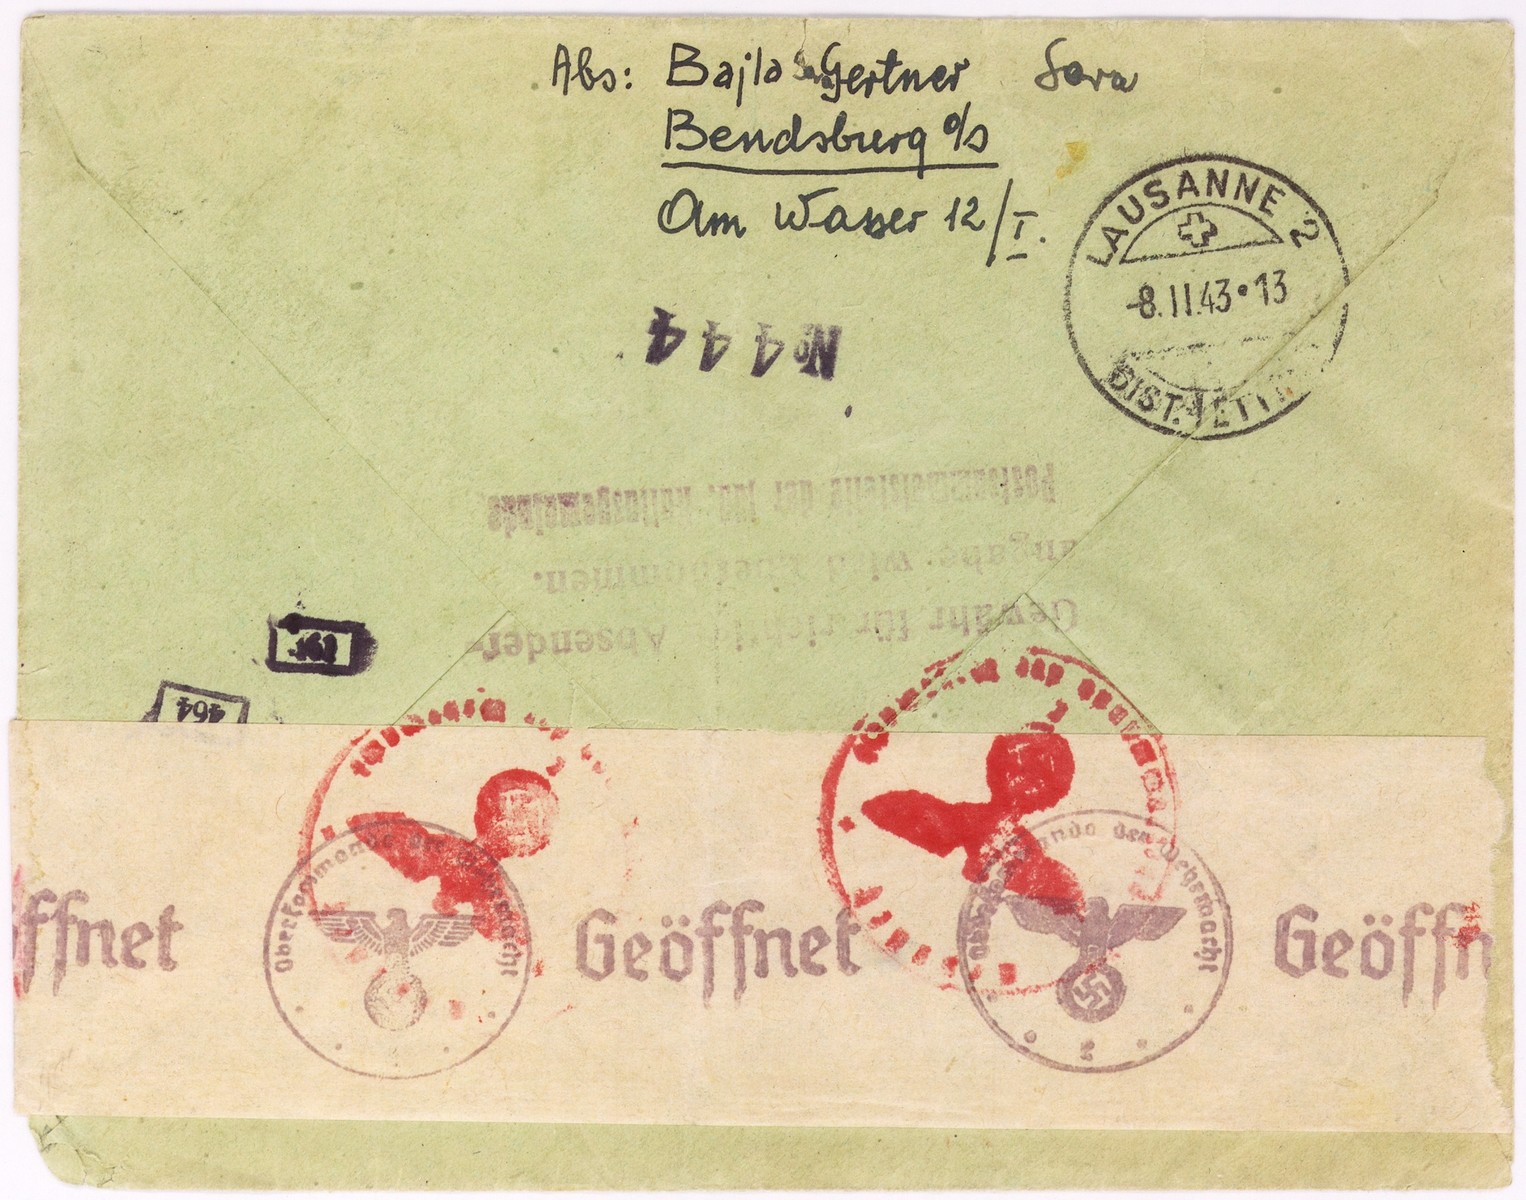 An envelope of a registered letter sent from  Dabrowa  by Bajla Gertner to Alfred Schwartzbaum in Lausanne, Switzerland.  The return address of the sender or senders states:  Bendsburg, Am Wasser 12/I.  On the back of the envelope there is a piece of tape with a stamp of the German censor.